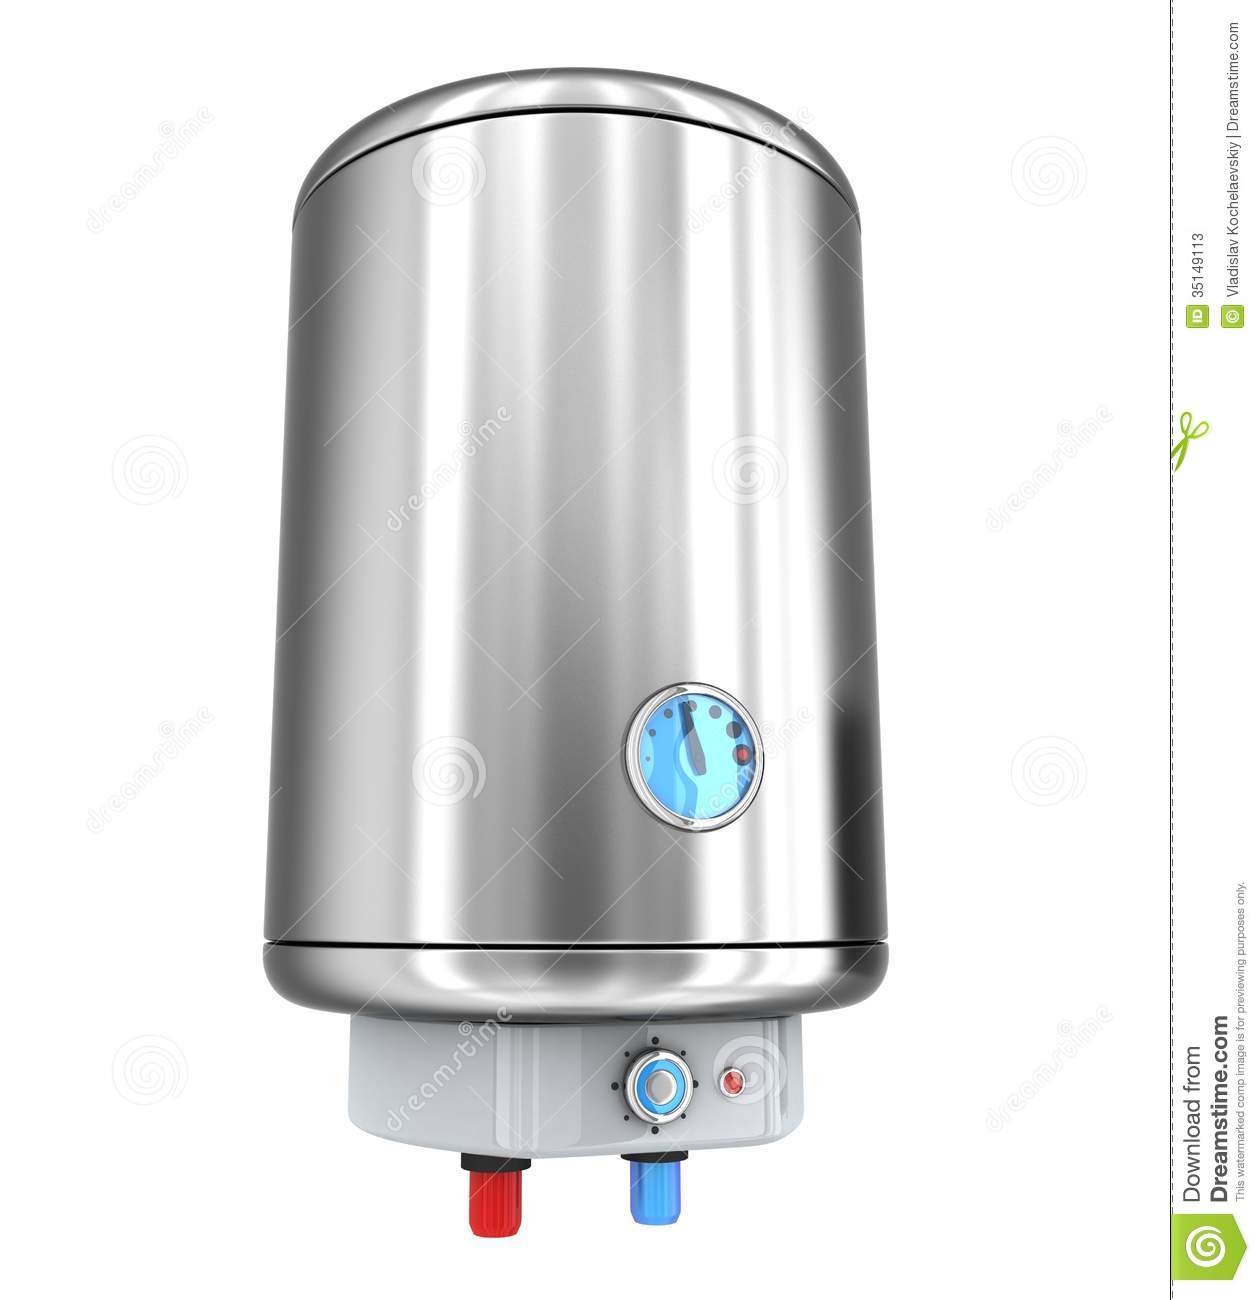 Heater Clipart Water Heater On White